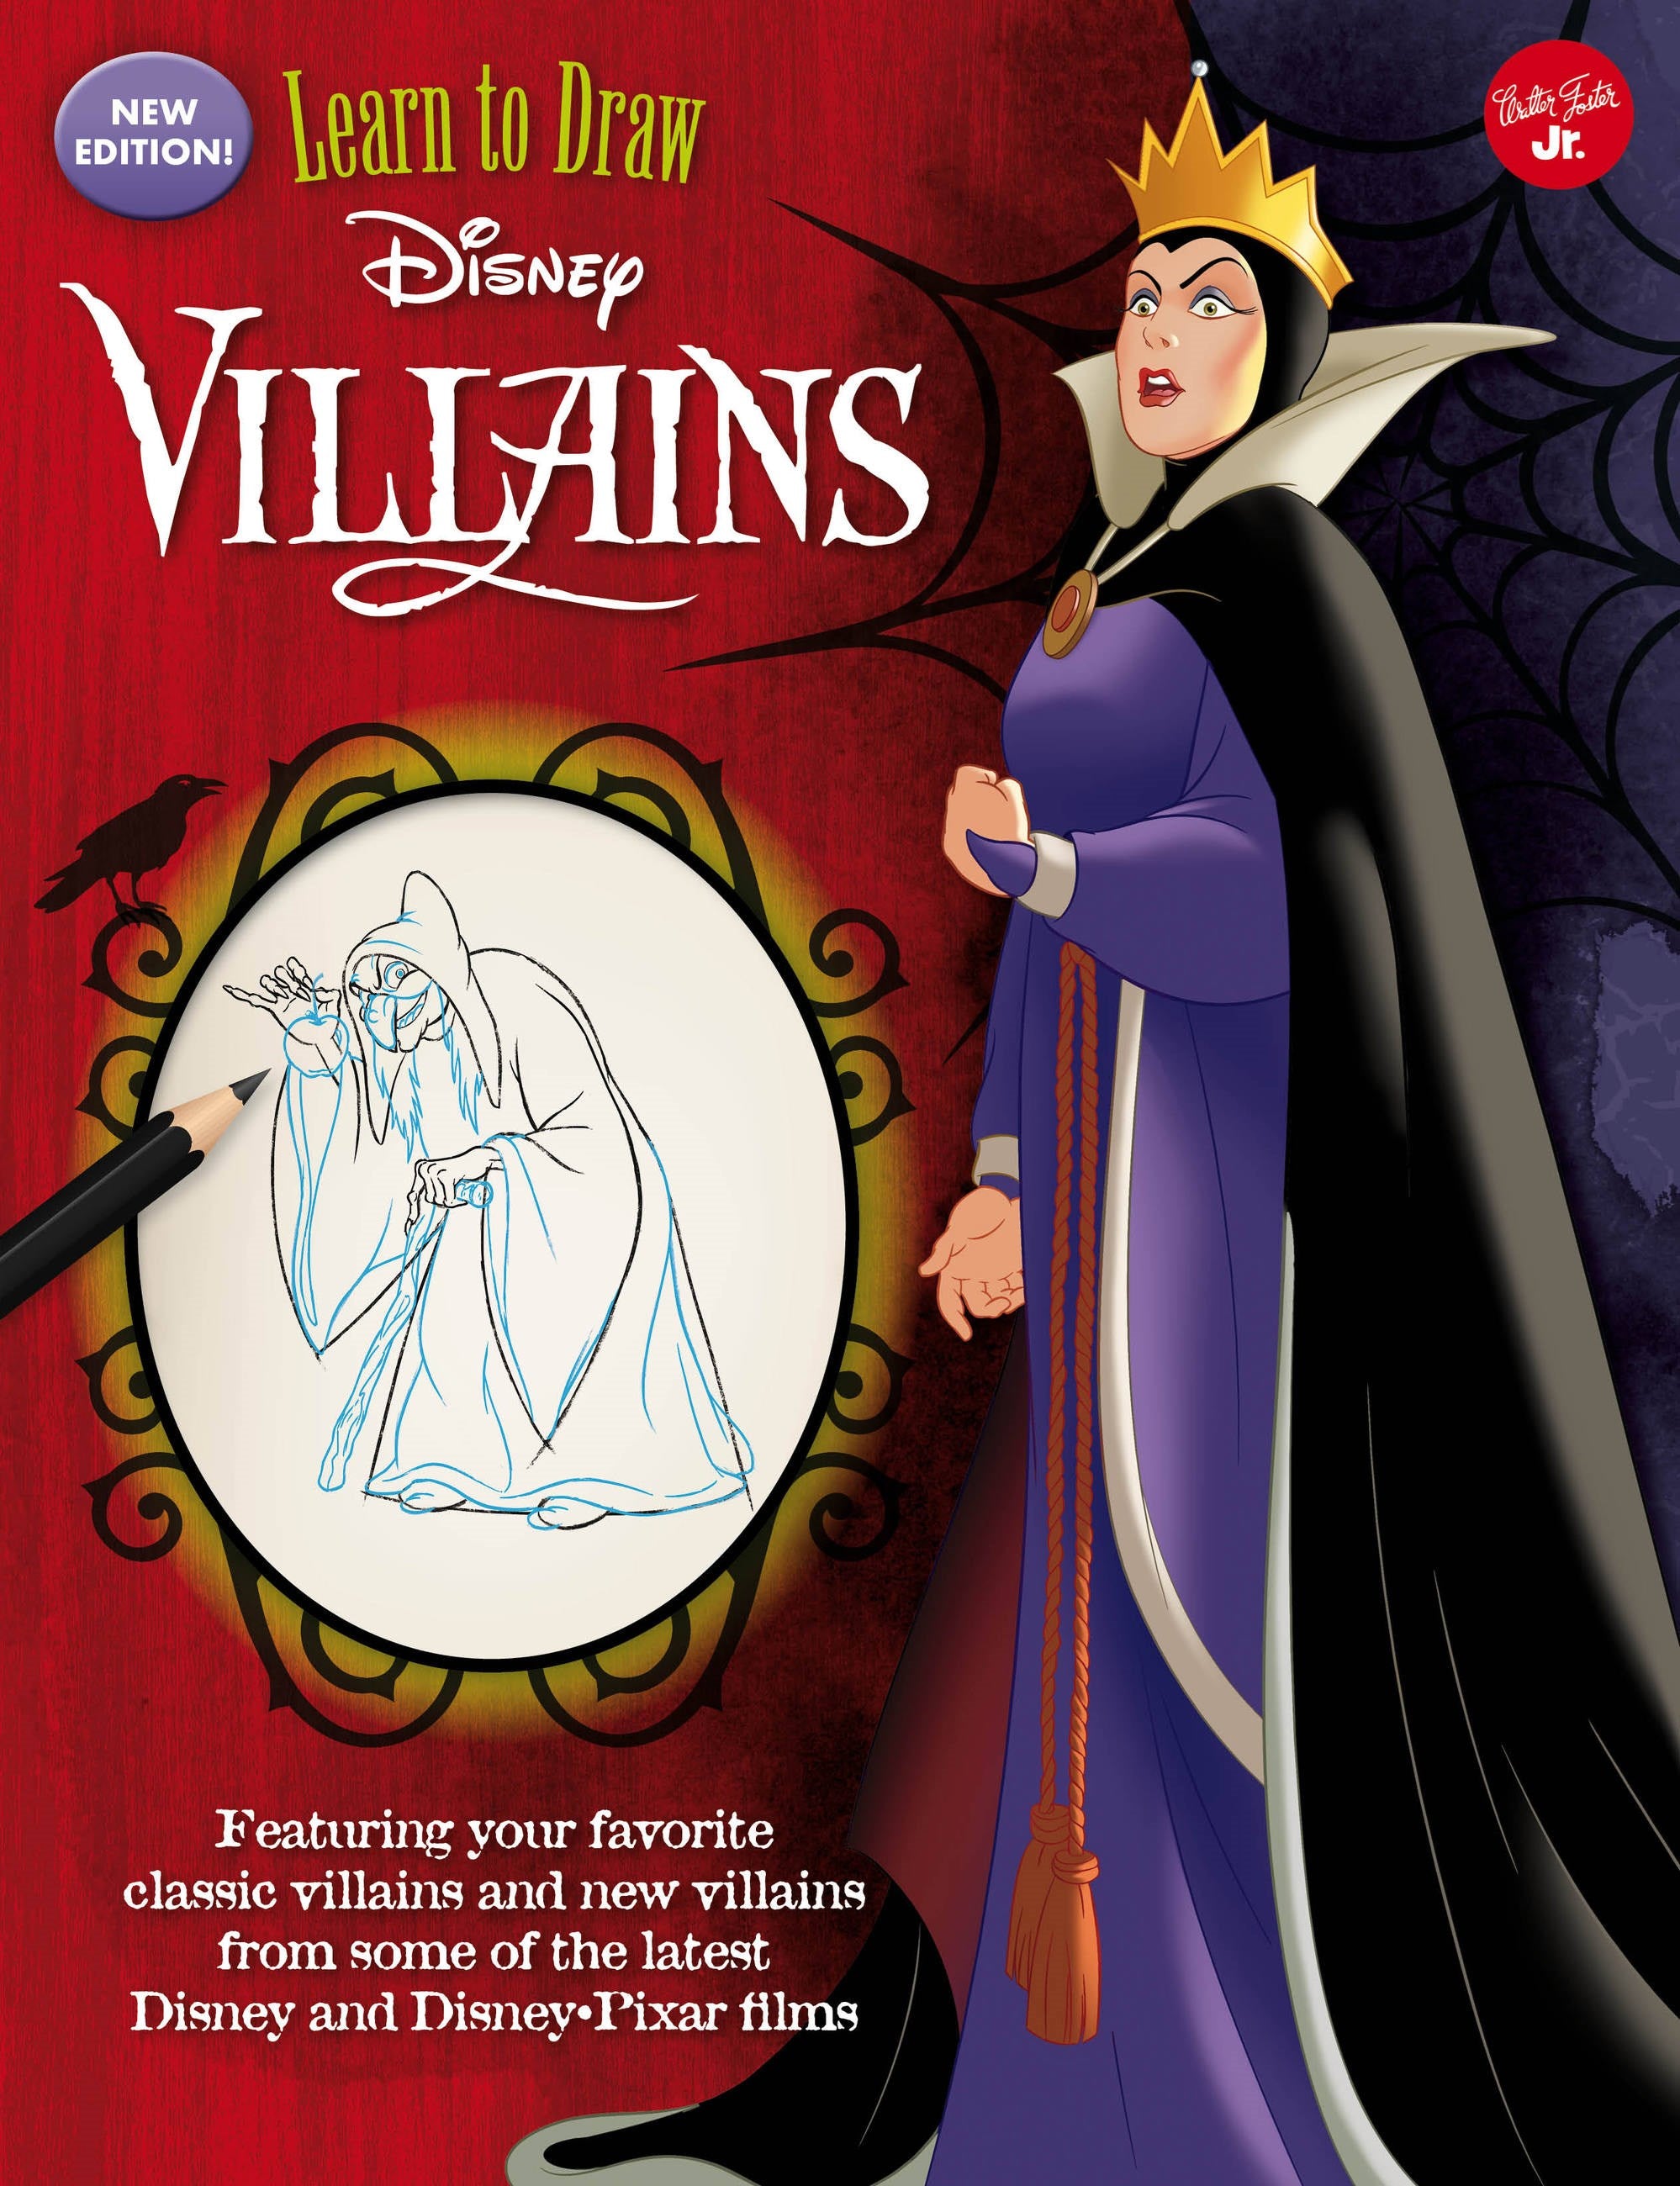 Learn to Draw Disney Villains: New edition! Featuring your favorite classic villains and new villains from some of the latest Disney and Disney/Pixar films (New edition)